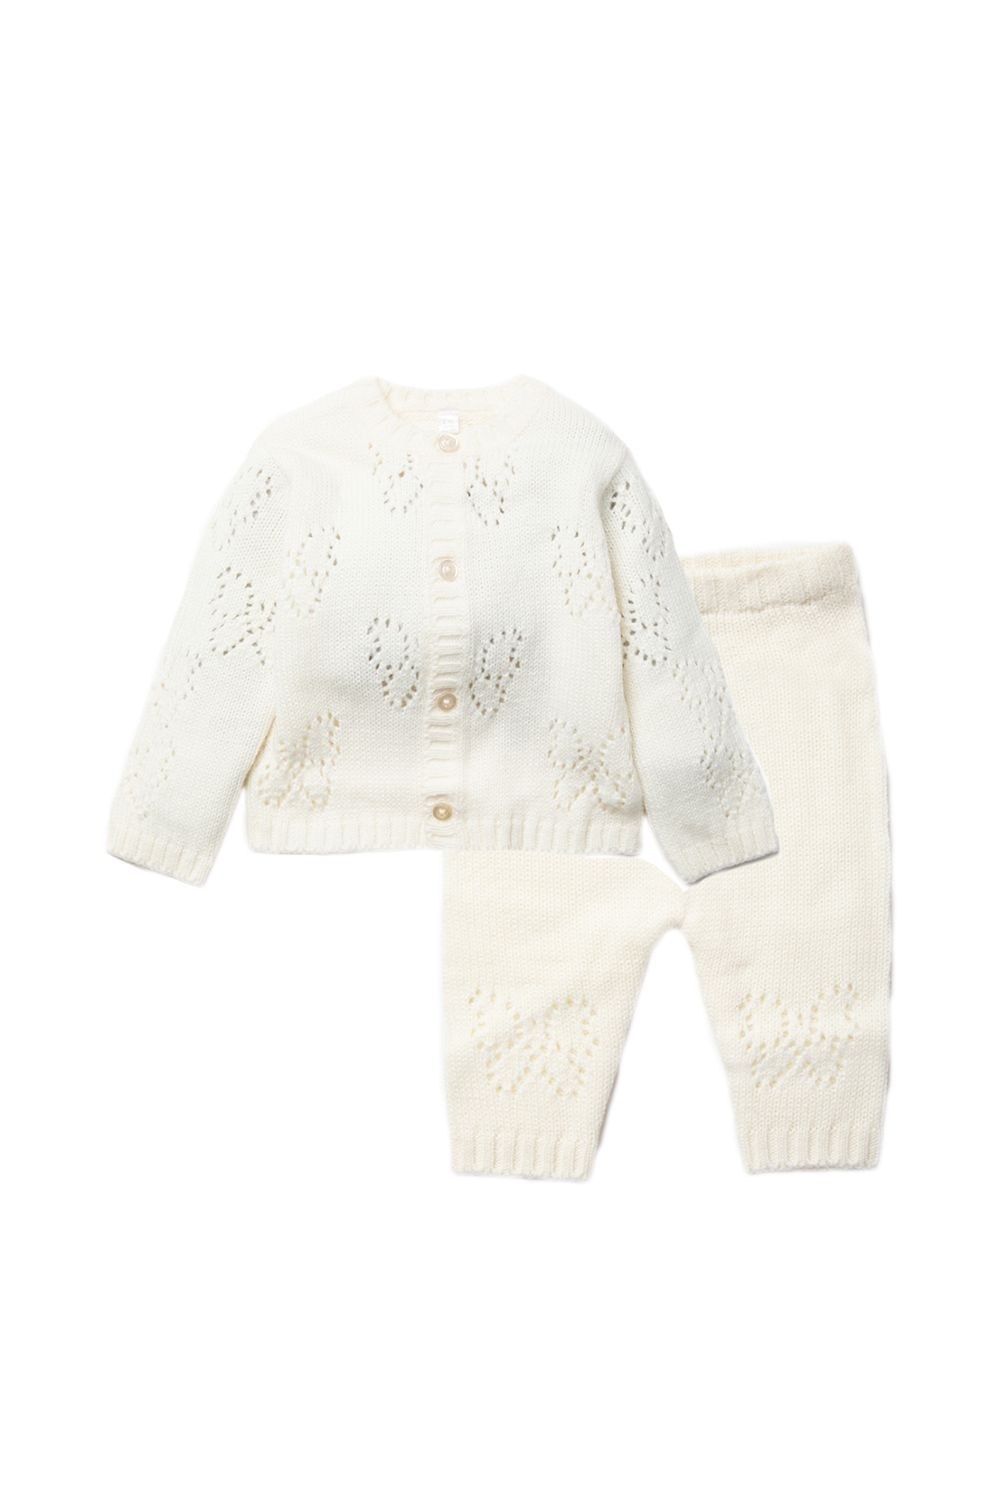 This Rock A Bye Baby Boutique four-piece set features a knitted cardigan, bottoms, a hat, and mitts. The knitted cardigan features an adorable bow print and button detailing. The trousers have the same bow print and an elasticated waistband. The waistband ties together the hat and mitts. This piece is perfect for keeping your little one comfortable and cosy. The set has adorable detailing and comes in lovely, boxed packaging, a lovely gift for the little one in your life.